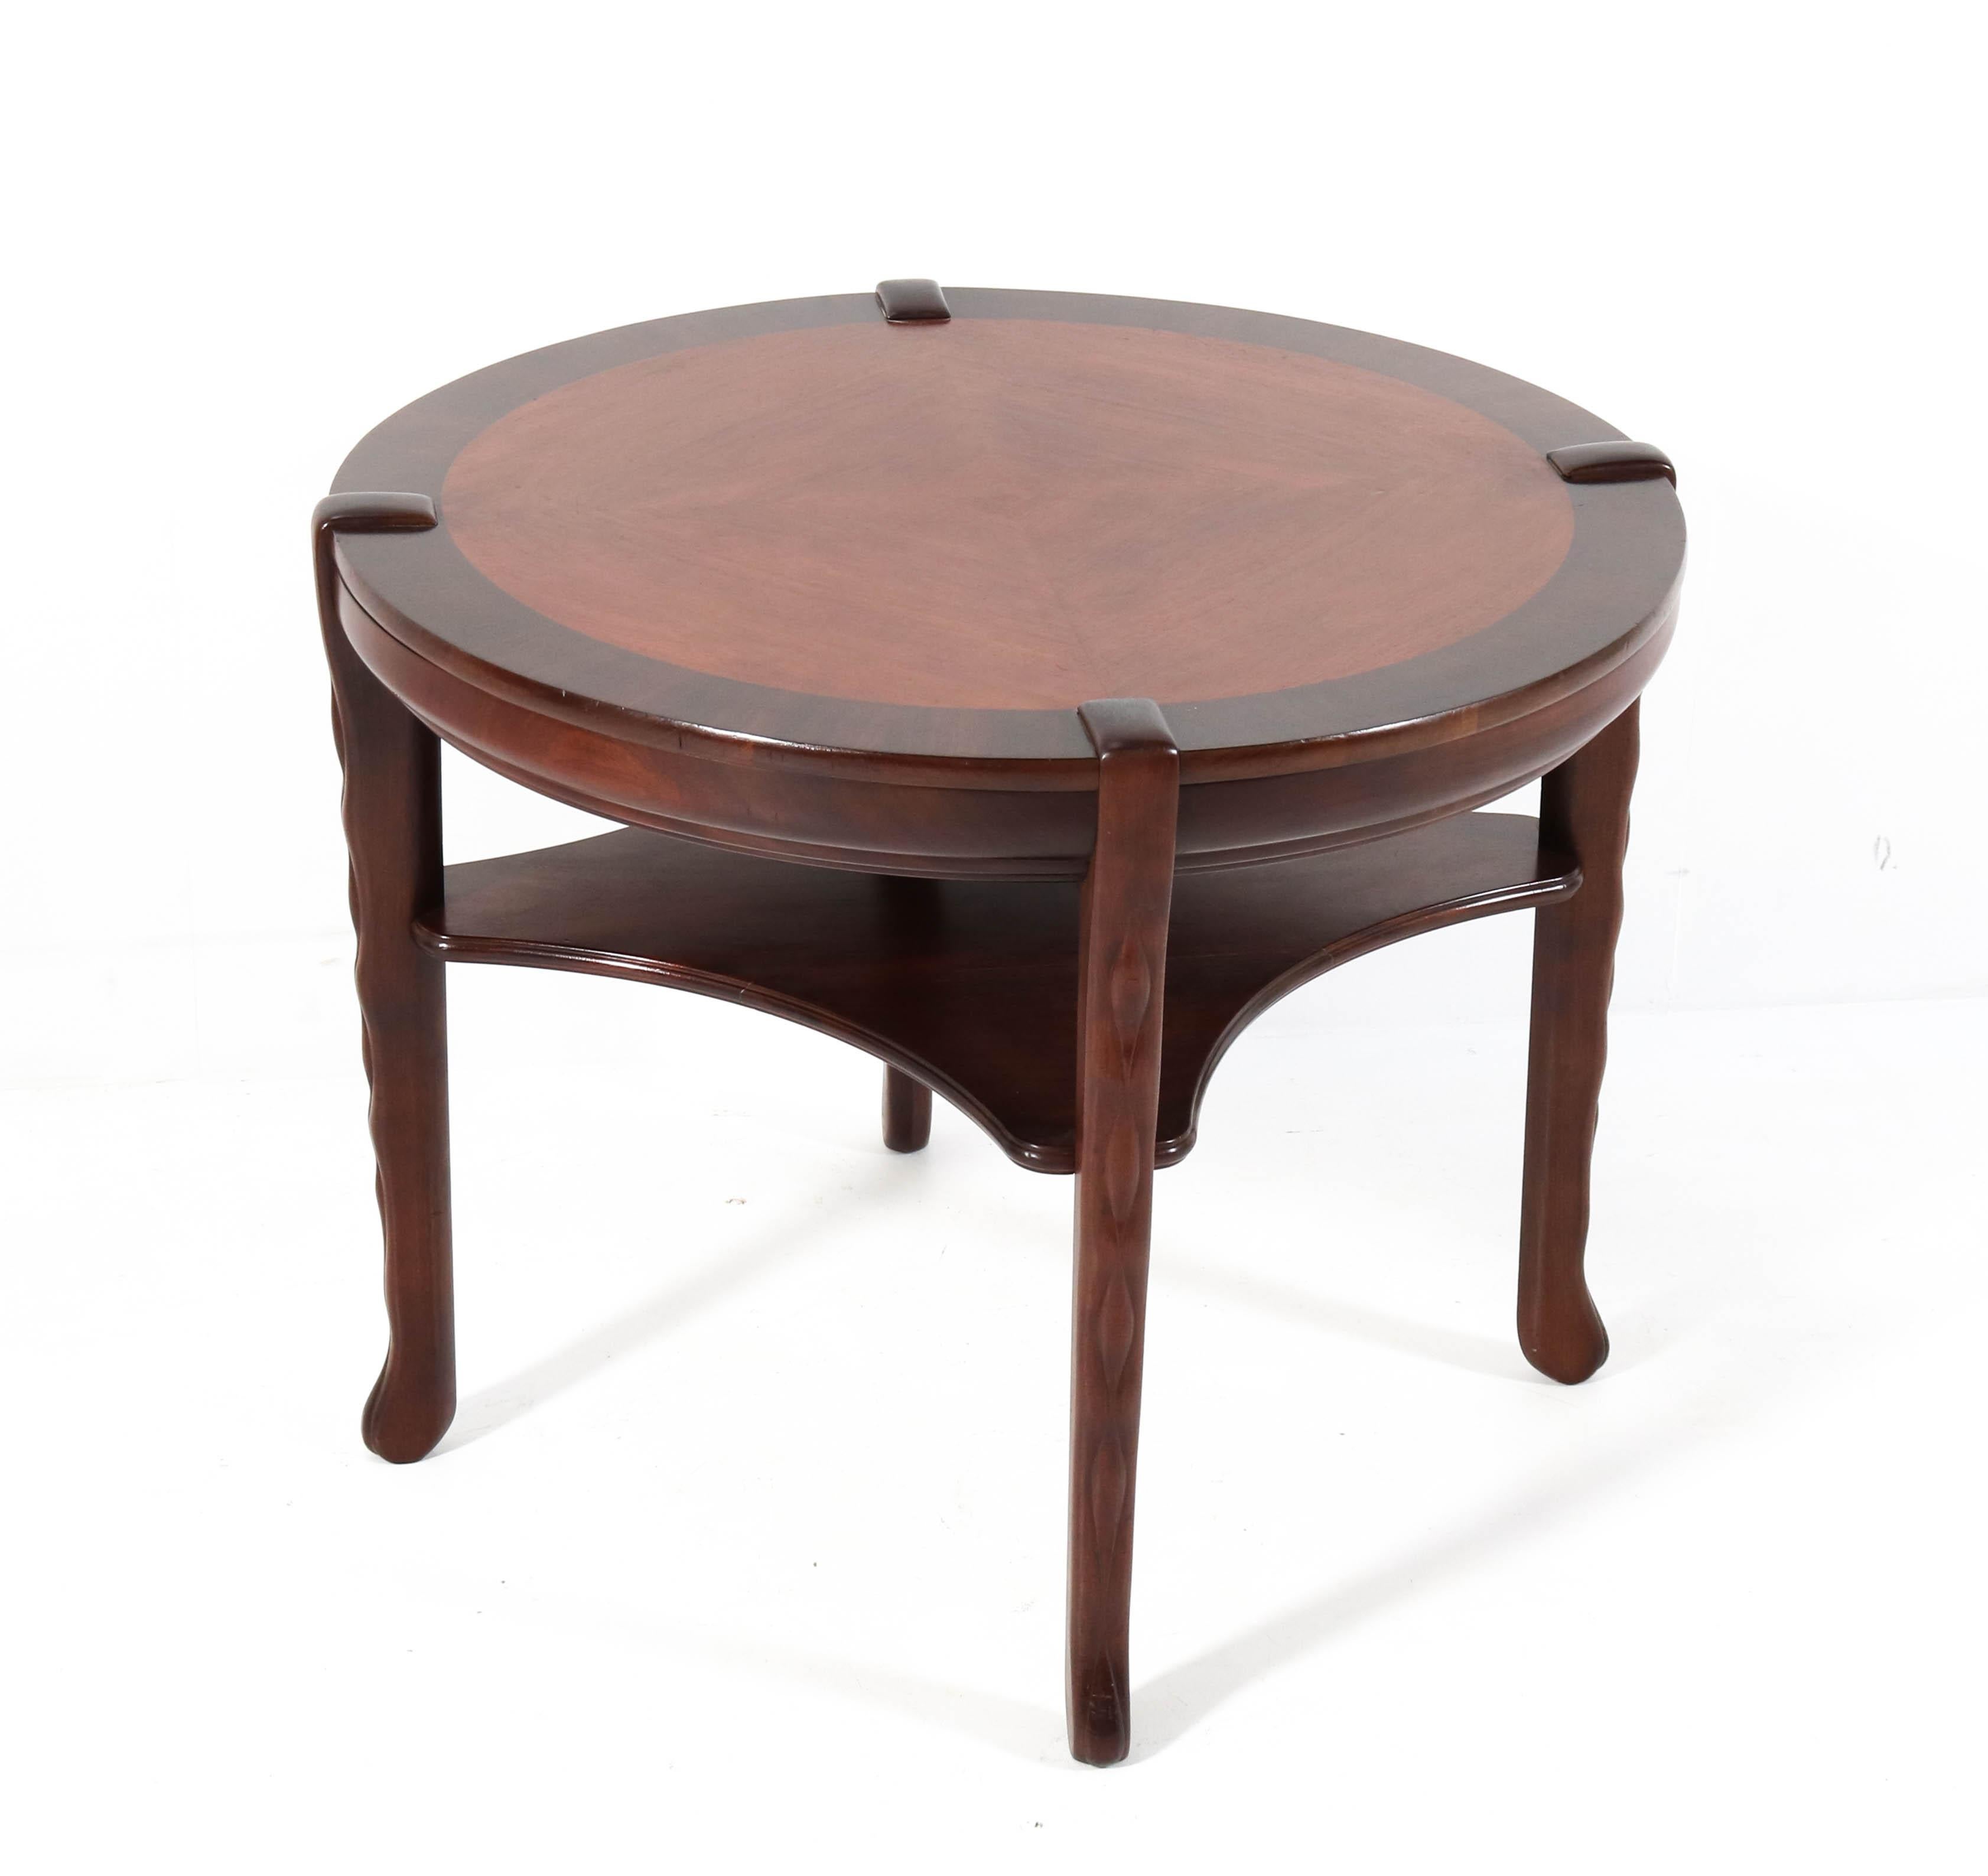 Stunning and rare Art Deco Amsterdamse School coffee table.
Design attributed to 't Woonhuys Amsterdam.
Striking Dutch design from the 1920s.
Solid walnut and walnut veneer with macassar veneer lining.
In good refinished condition with a